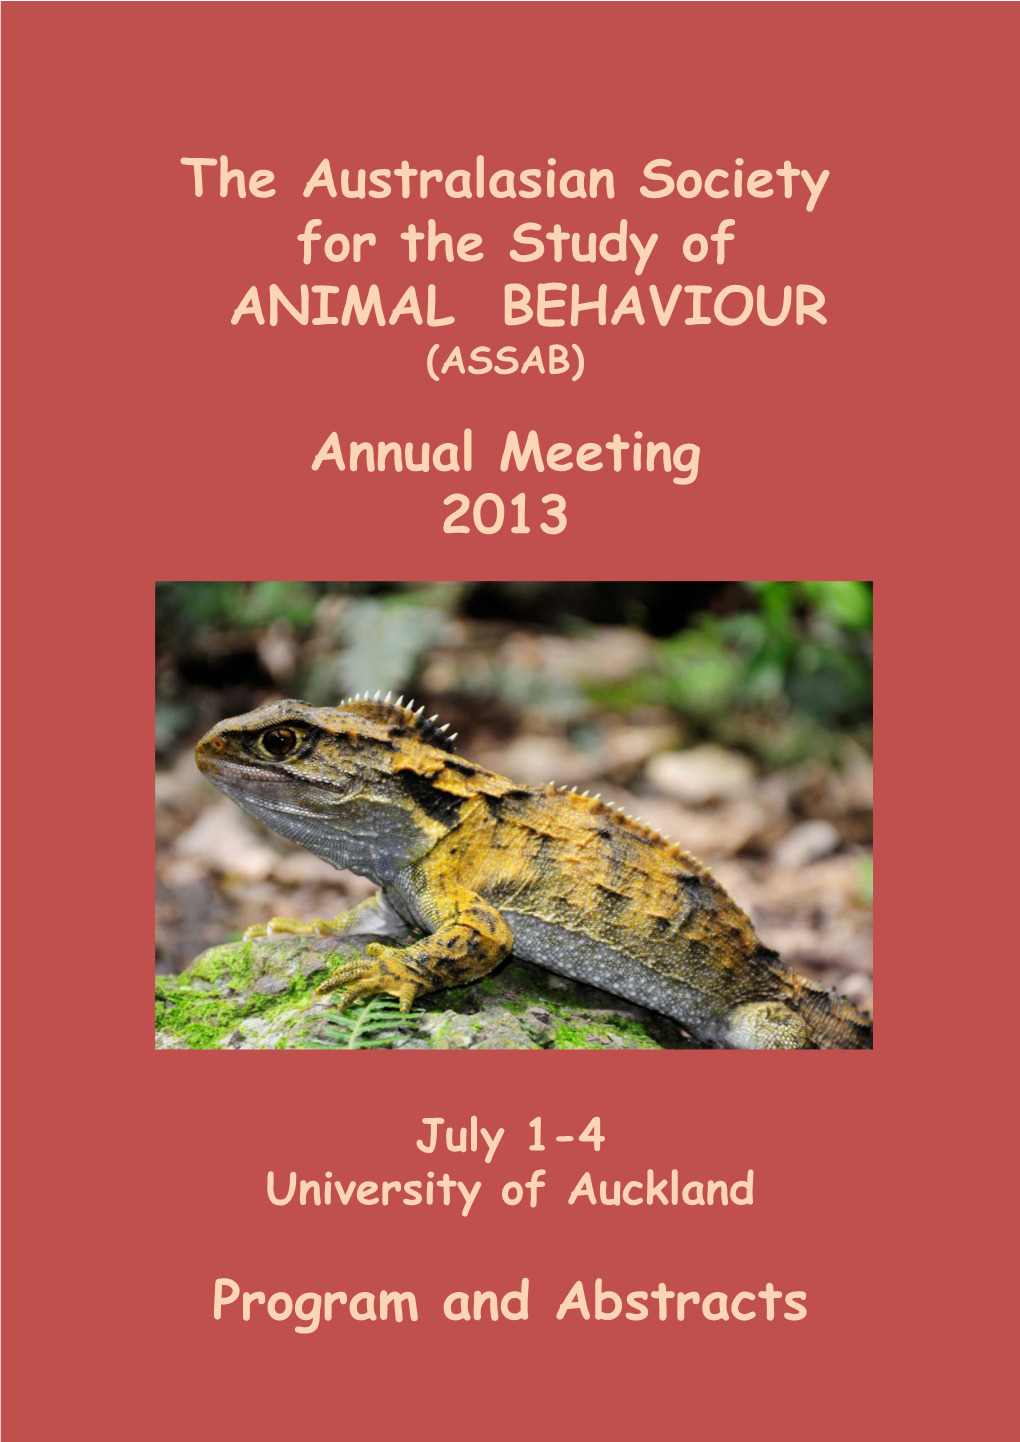 The Australasian Society for the Study of ANIMAL BEHAVIOUR Annual